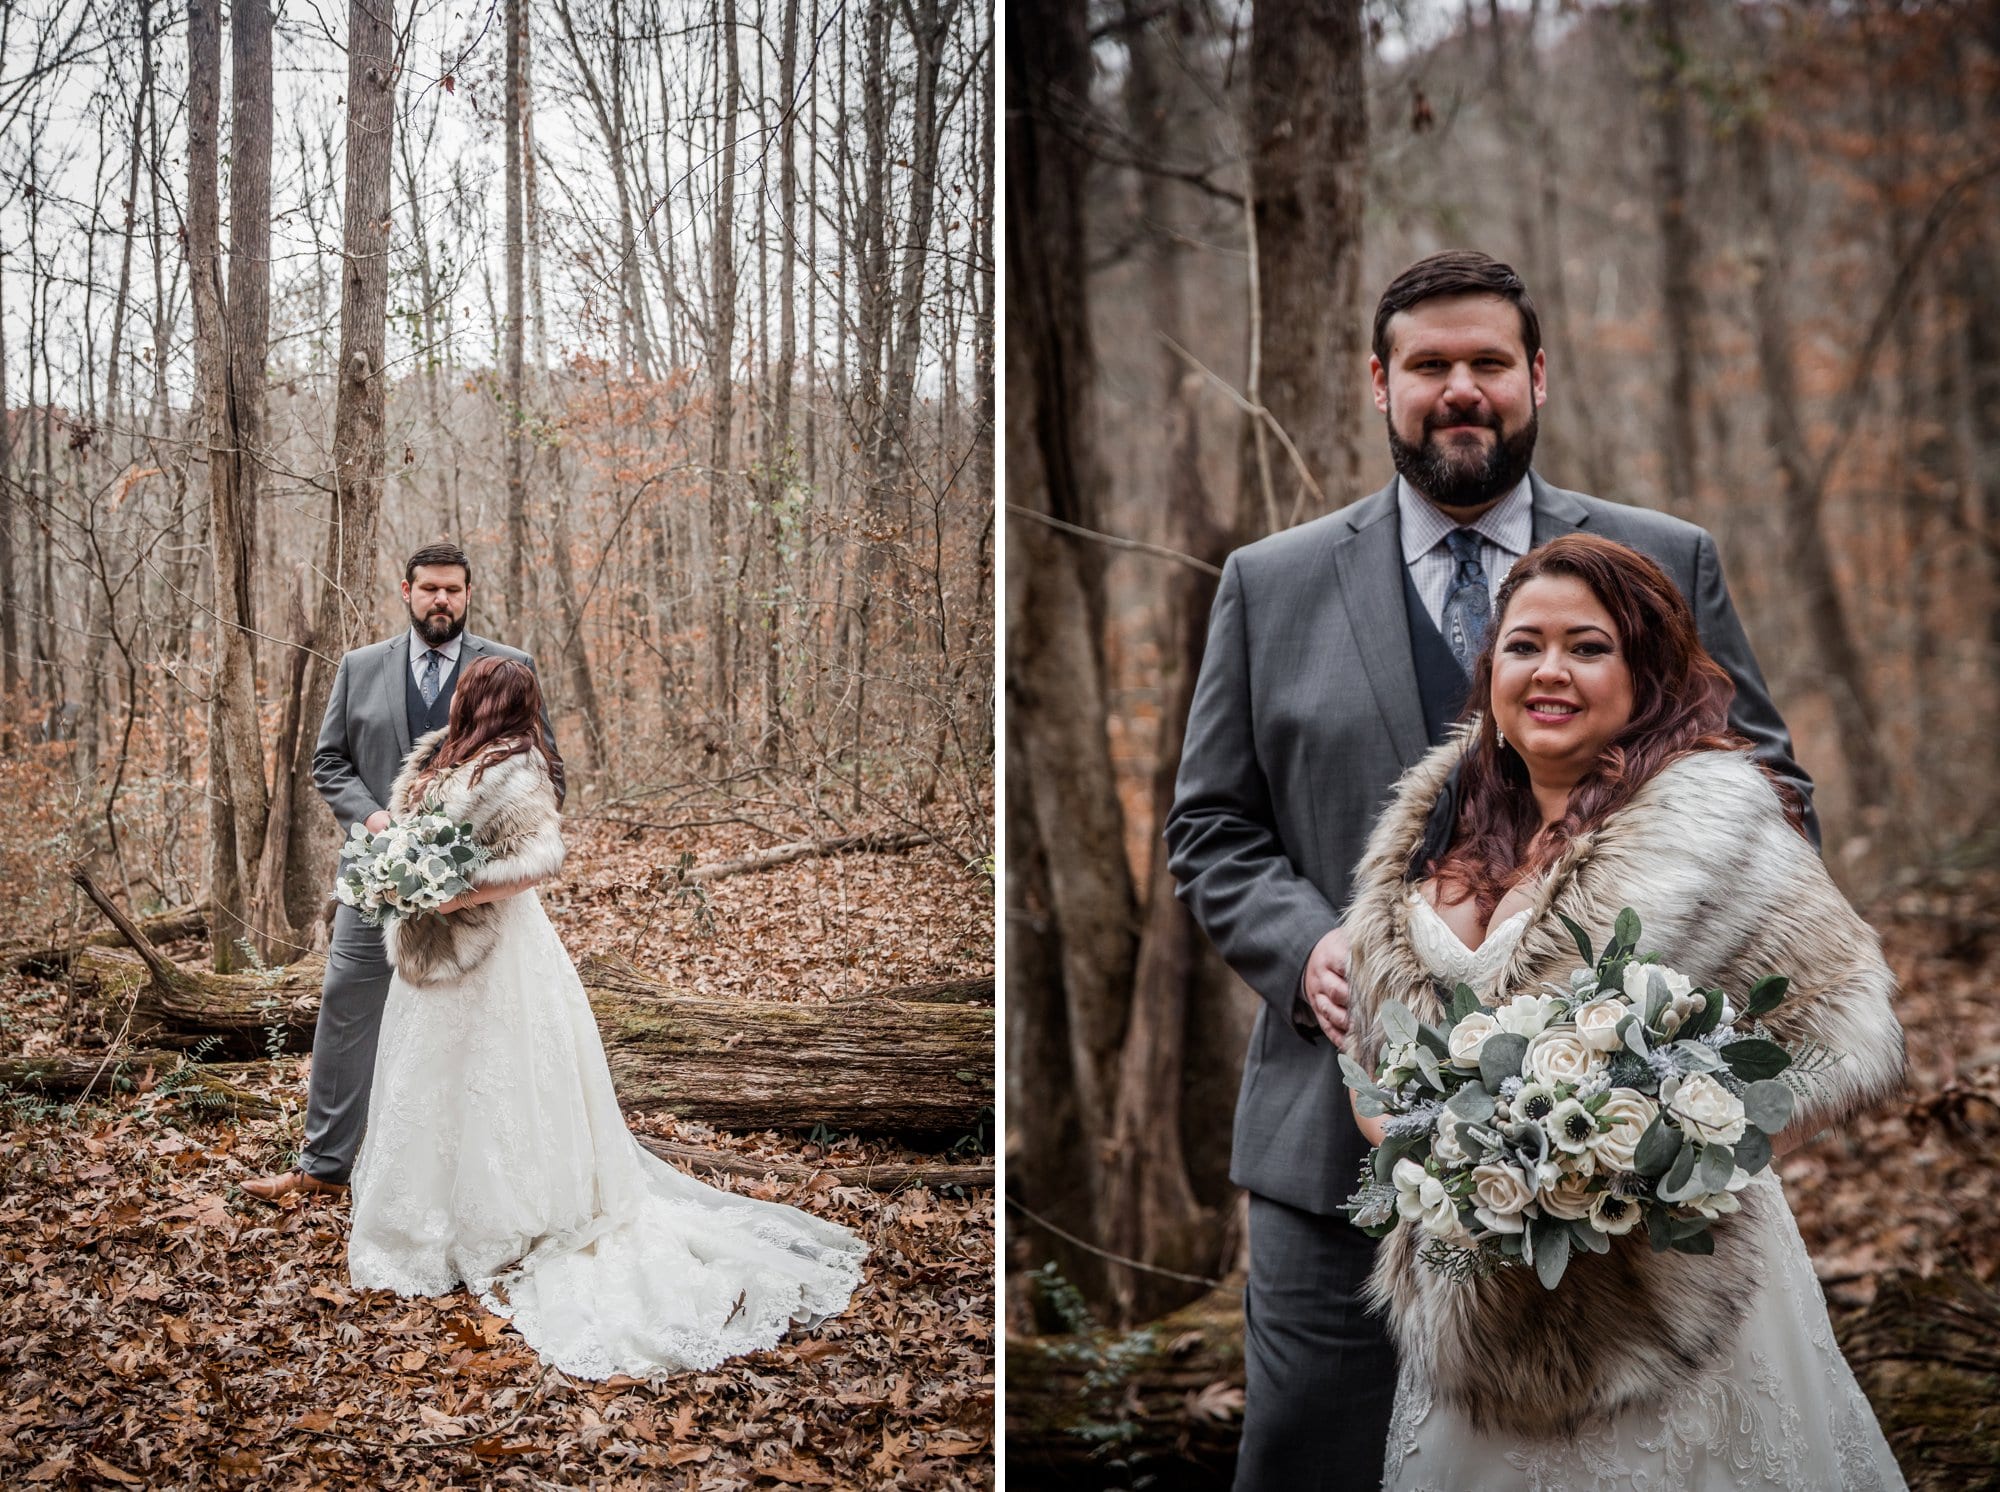 Getting married in the Smokey Mountains at a Smokey Mountain elopement.